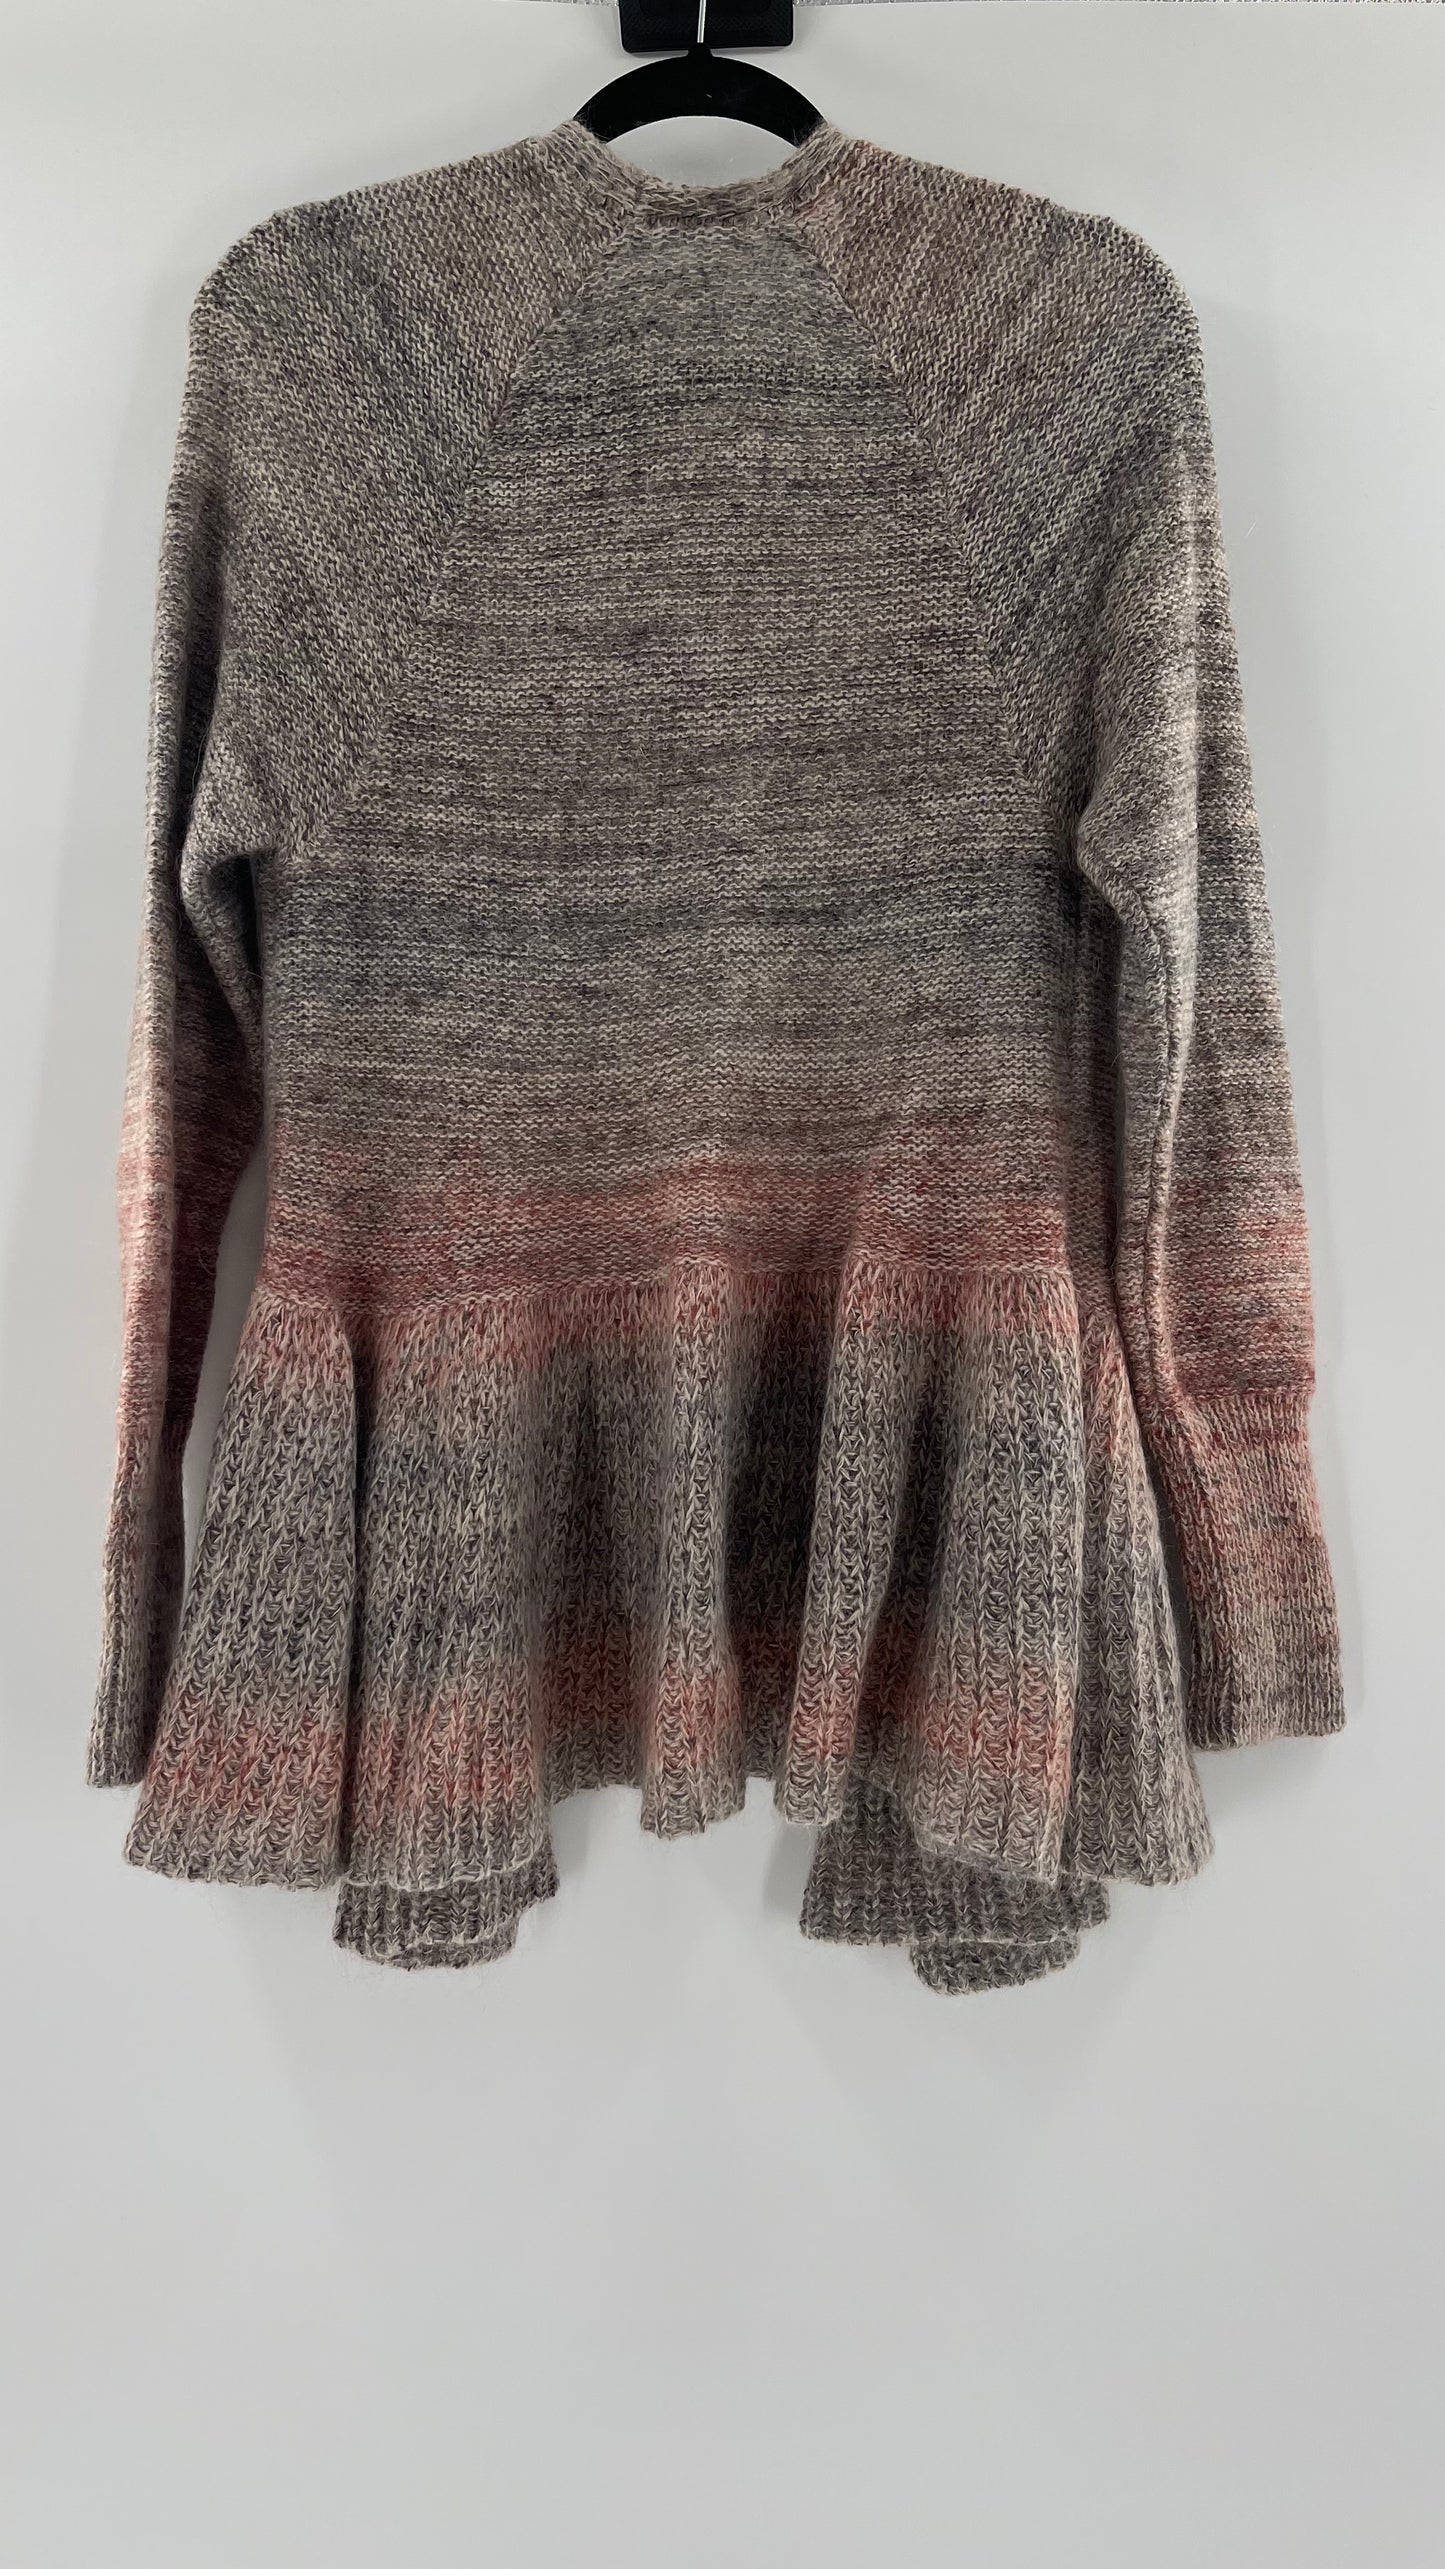 Anthropologie Knitted + Knotted Grey Pink Cardigan (small)